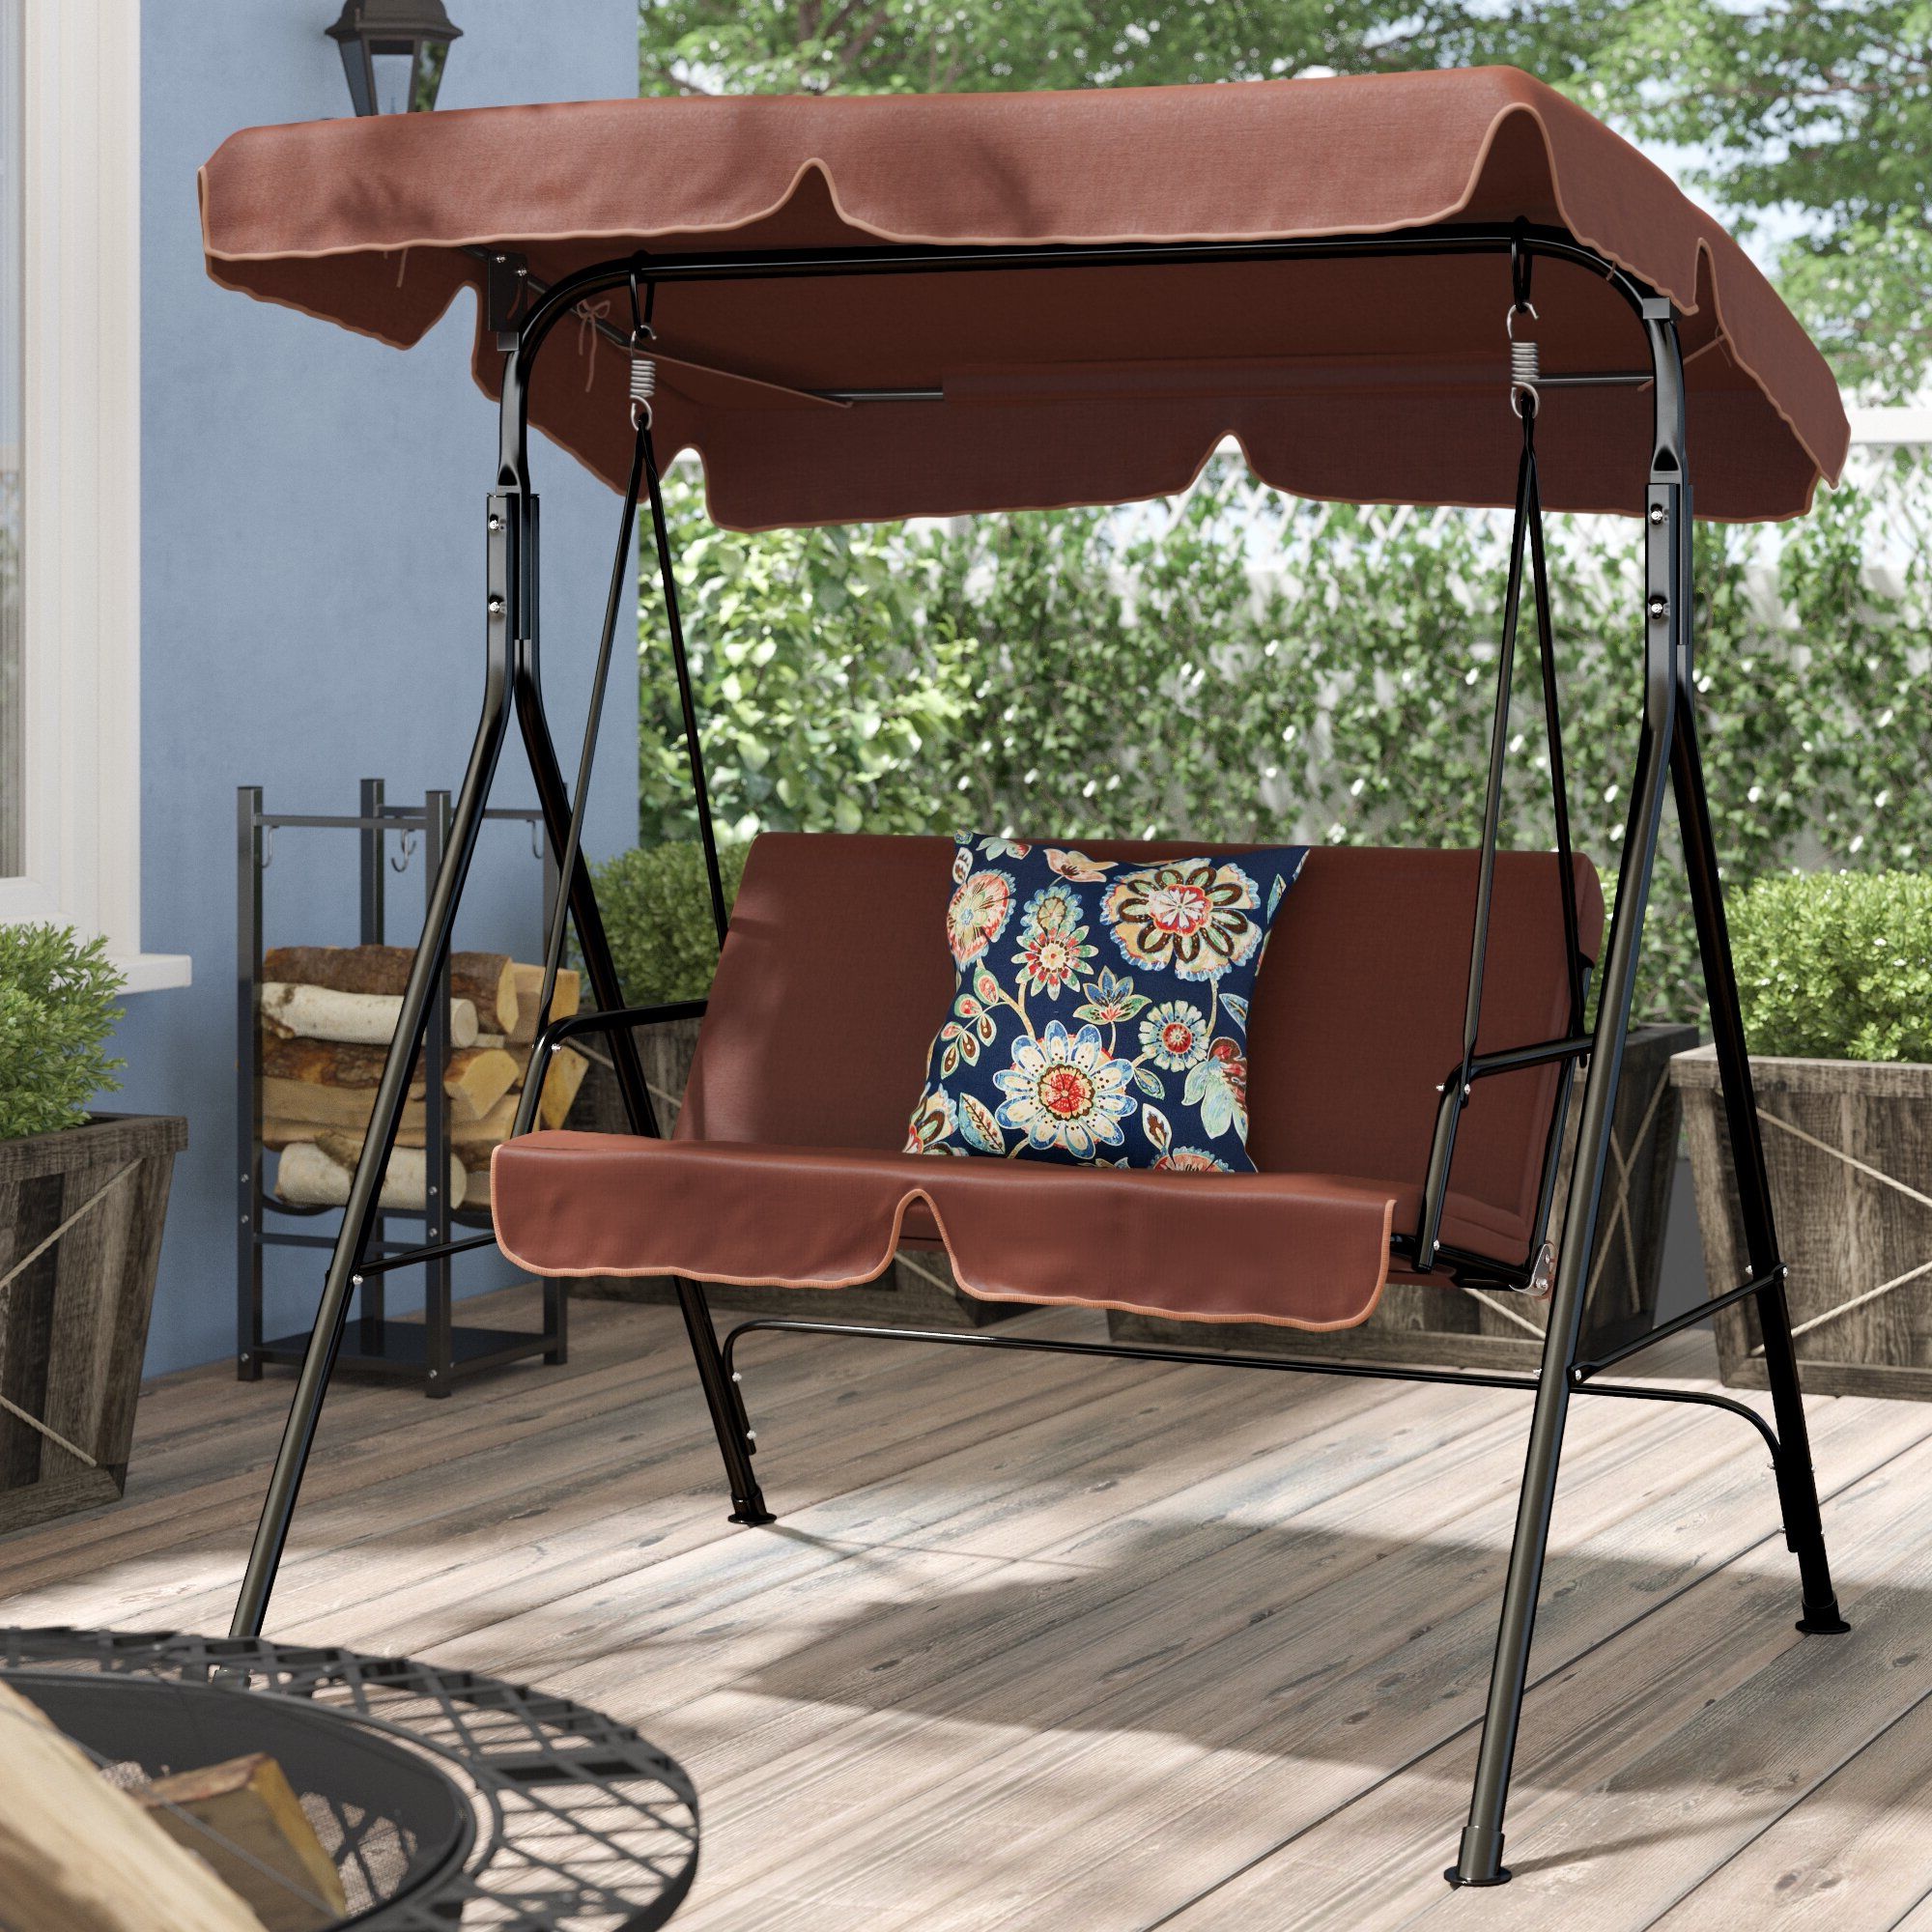 Patio Loveseat Canopy Hammock Porch Swings With Stand Pertaining To Well Known Mansour Patio Loveseat Canopy Hammock Porch Swing With Stand (Photo 8 of 30)